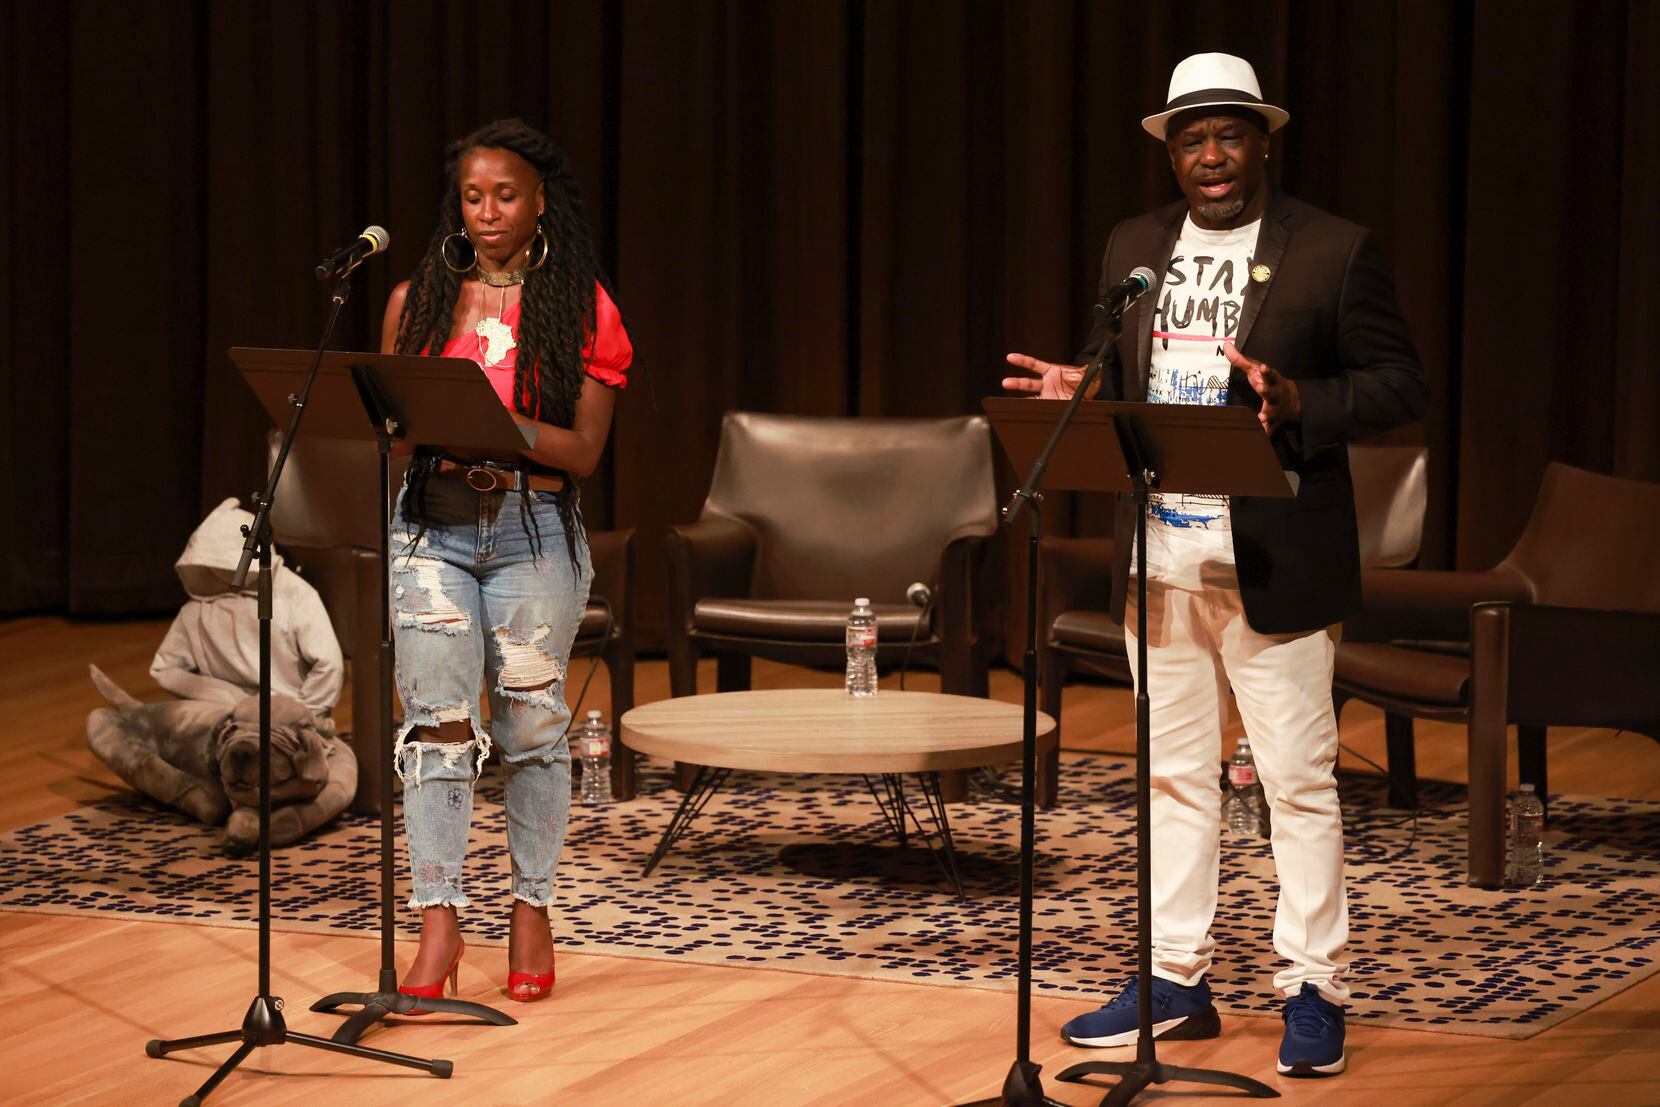 Iv Amenti and Mike Guinn perform during the 'Making the Scene' event at the Dallas Museum of...